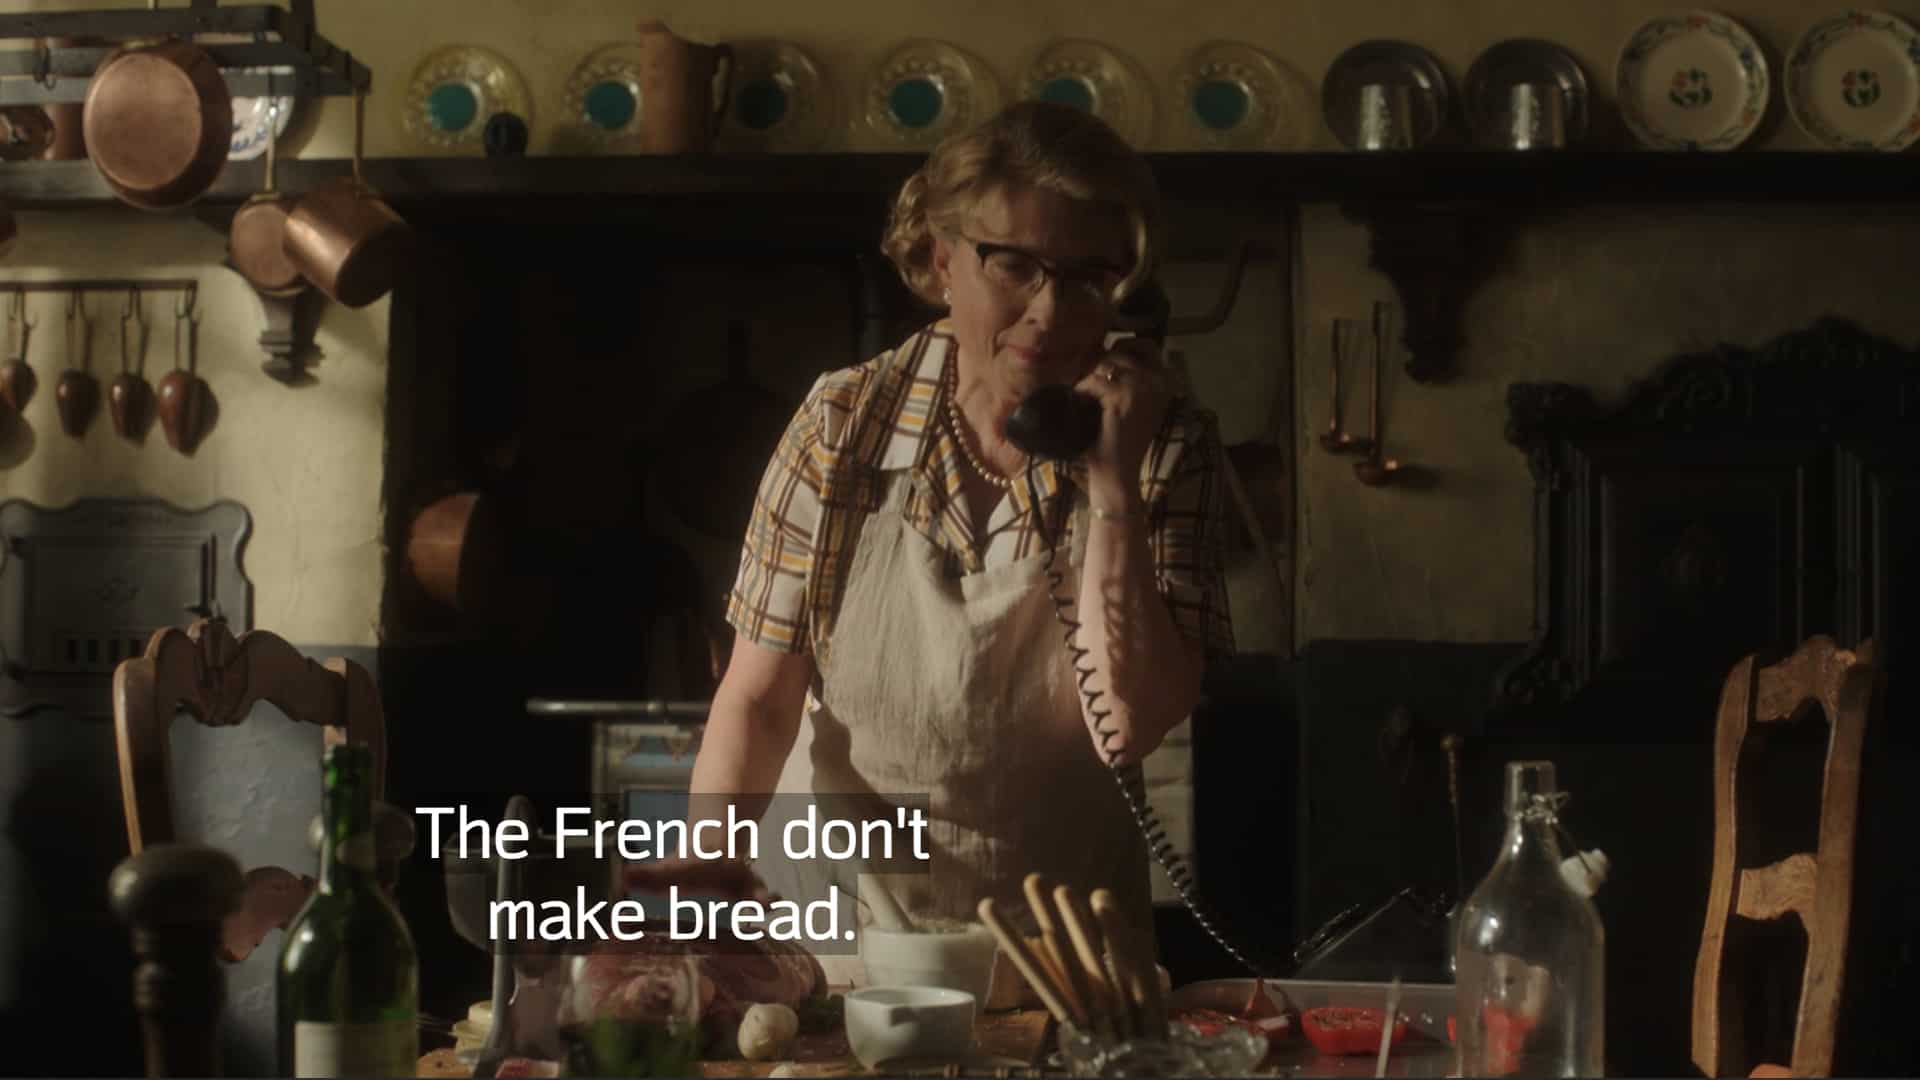 Simca (Isabella Rossellini)  questioning Julia wanting to include bread in their cook book